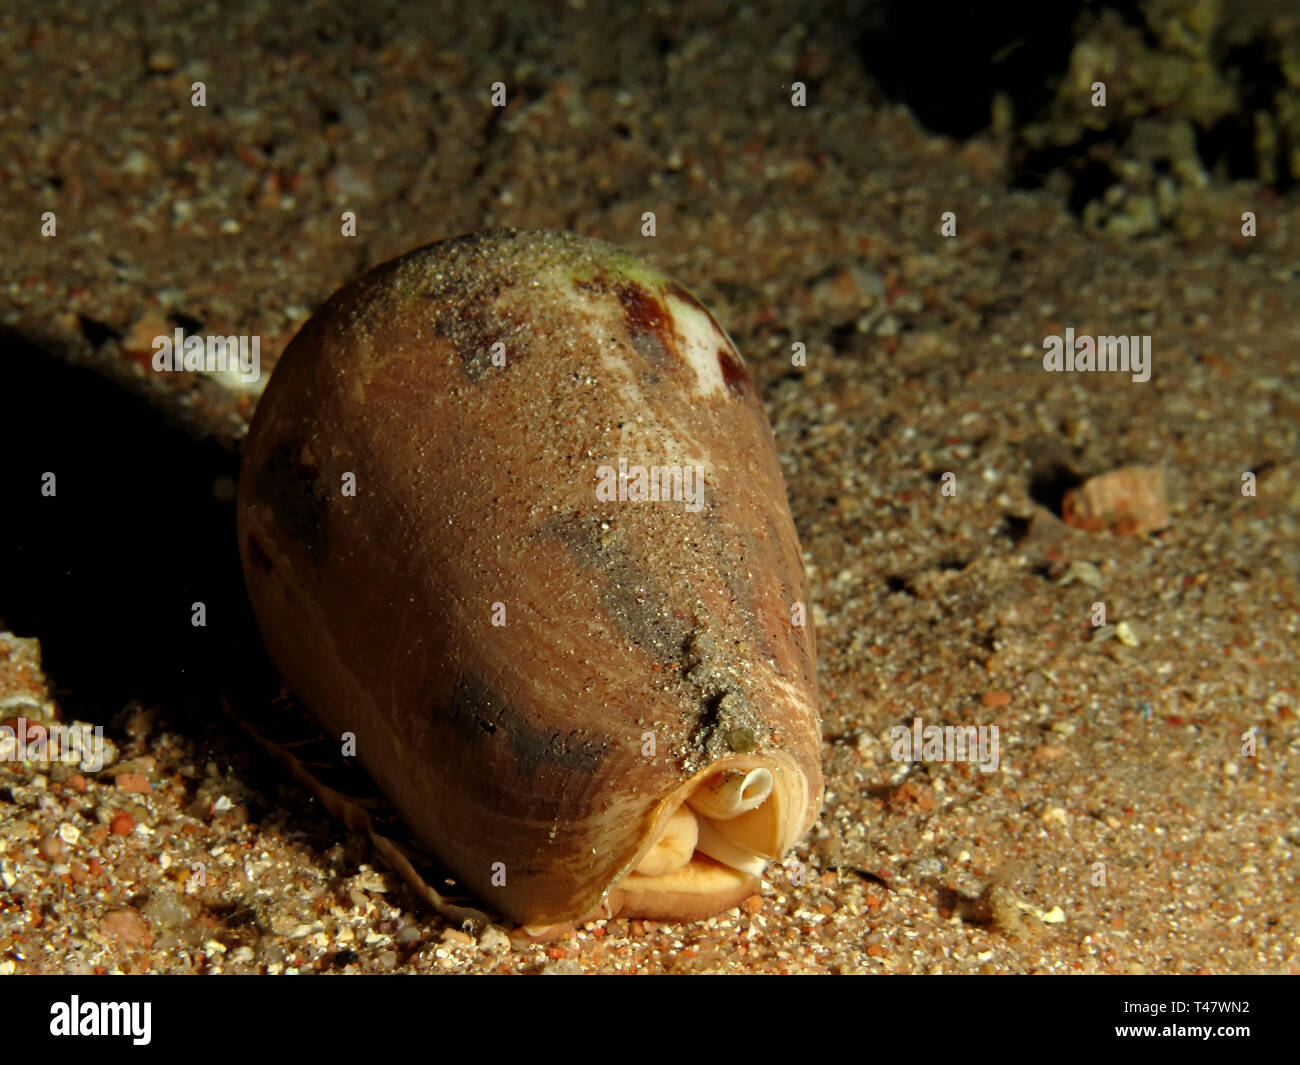 Geography cone (Conus geographus) Taking in Red Sea, Egypt. Stock Photo